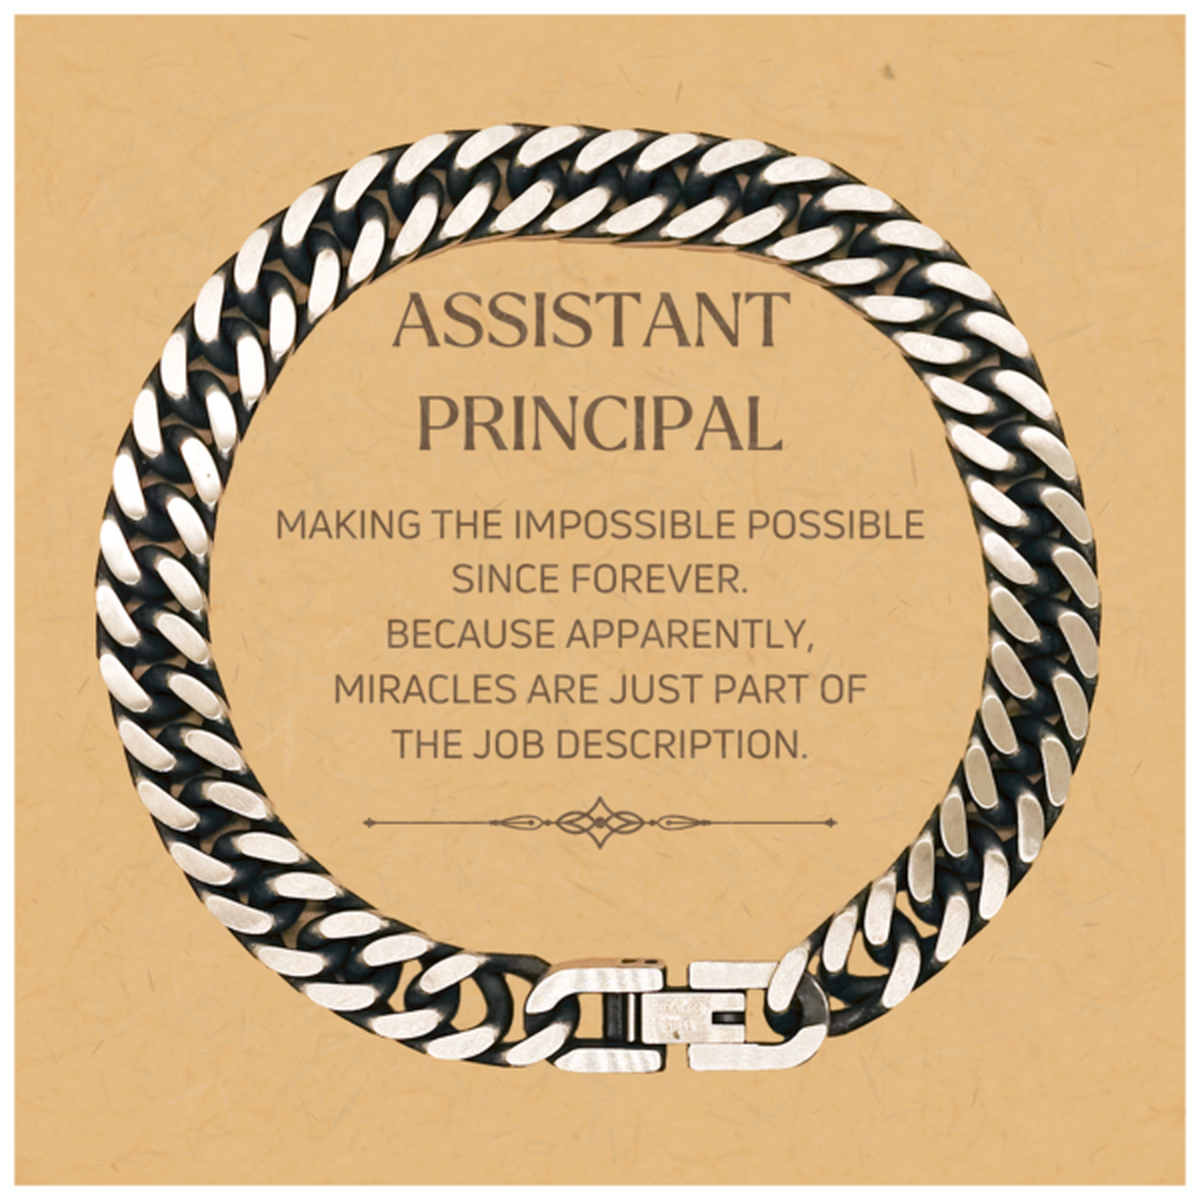 Funny Assistant Principal Gifts, Miracles are just part of the job description, Inspirational Birthday Christmas Cuban Link Chain Bracelet For Assistant Principal, Men, Women, Coworkers, Friends, Boss